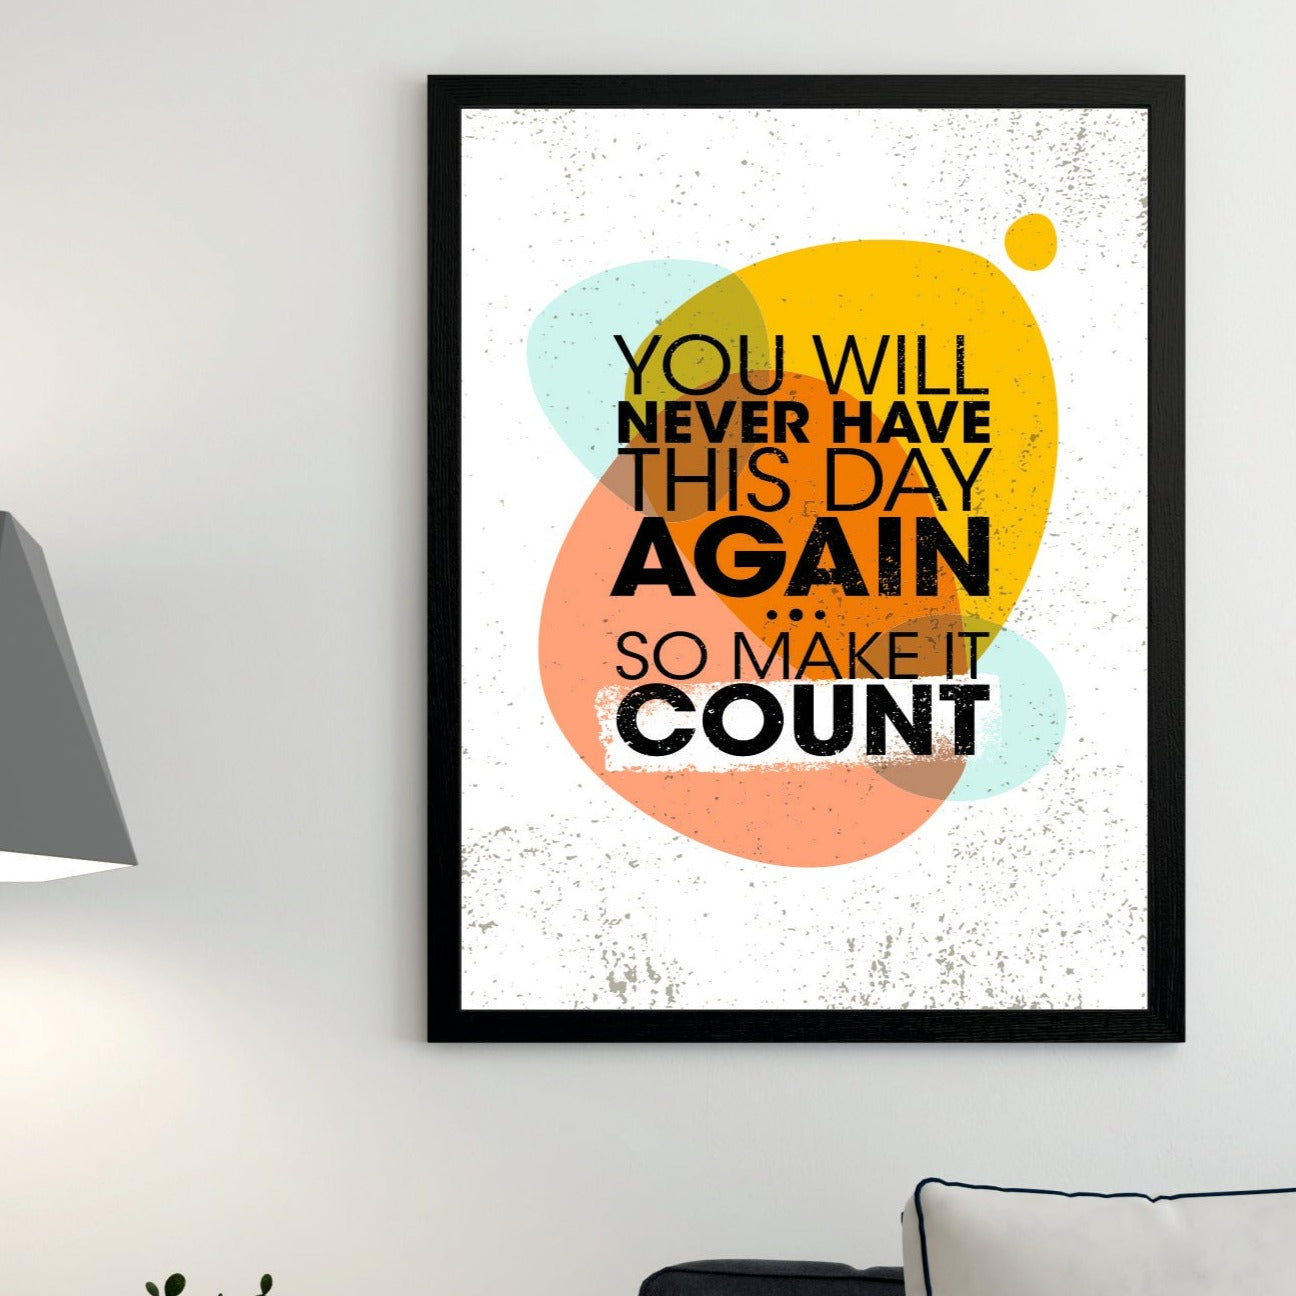 Make it Count - Poster Frame (Pack of 2 Pieces)